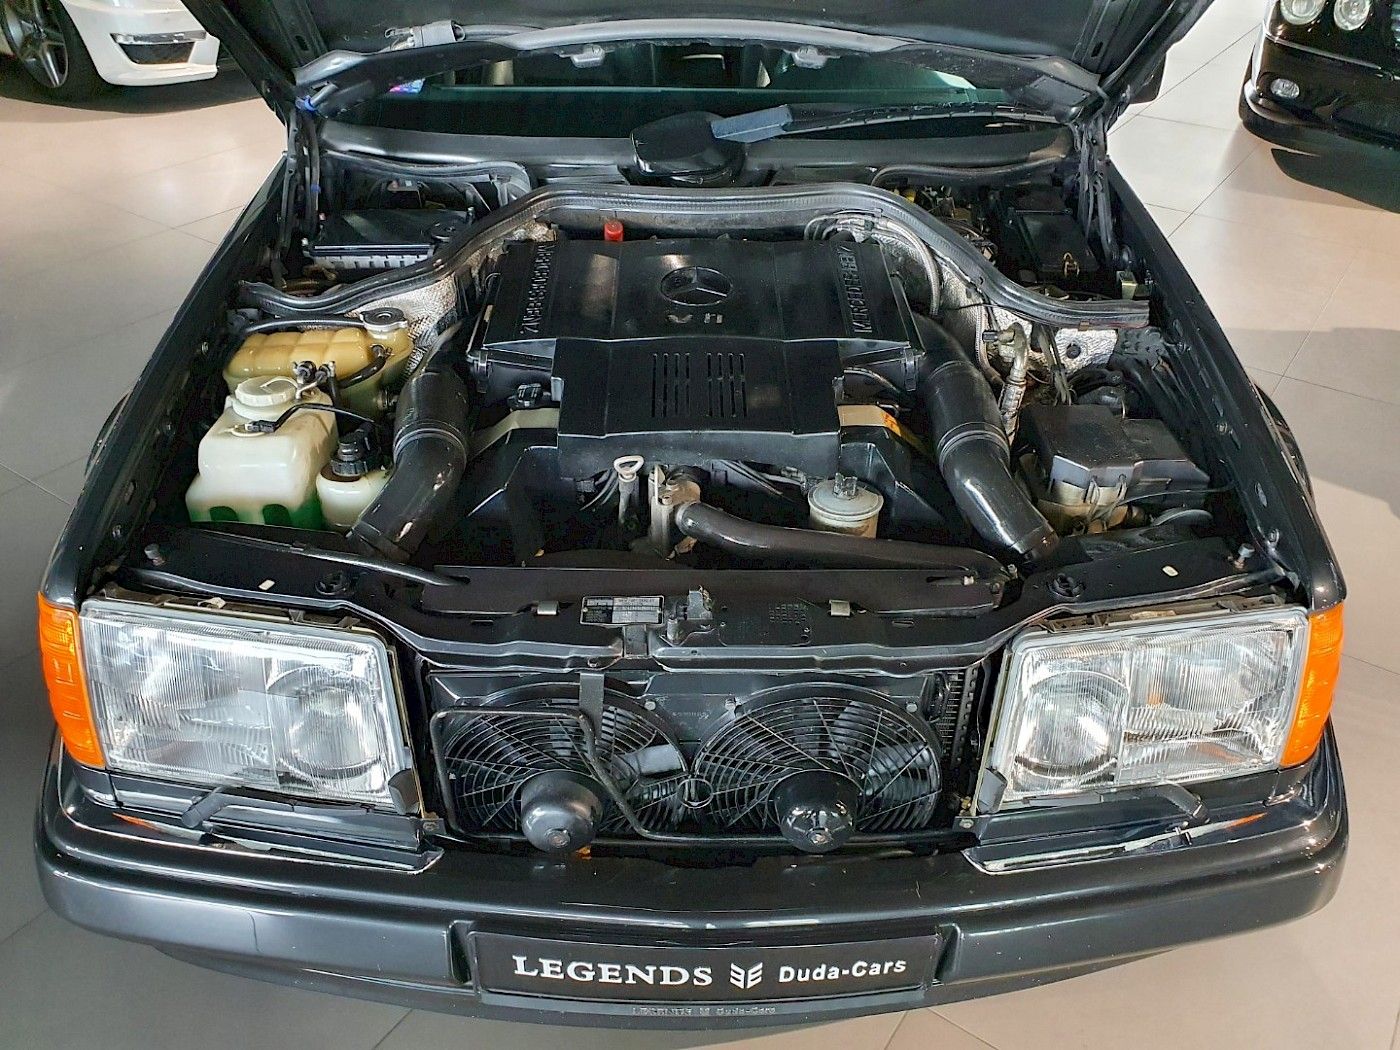 Engine Bay of the Mercedes-Benz 500E